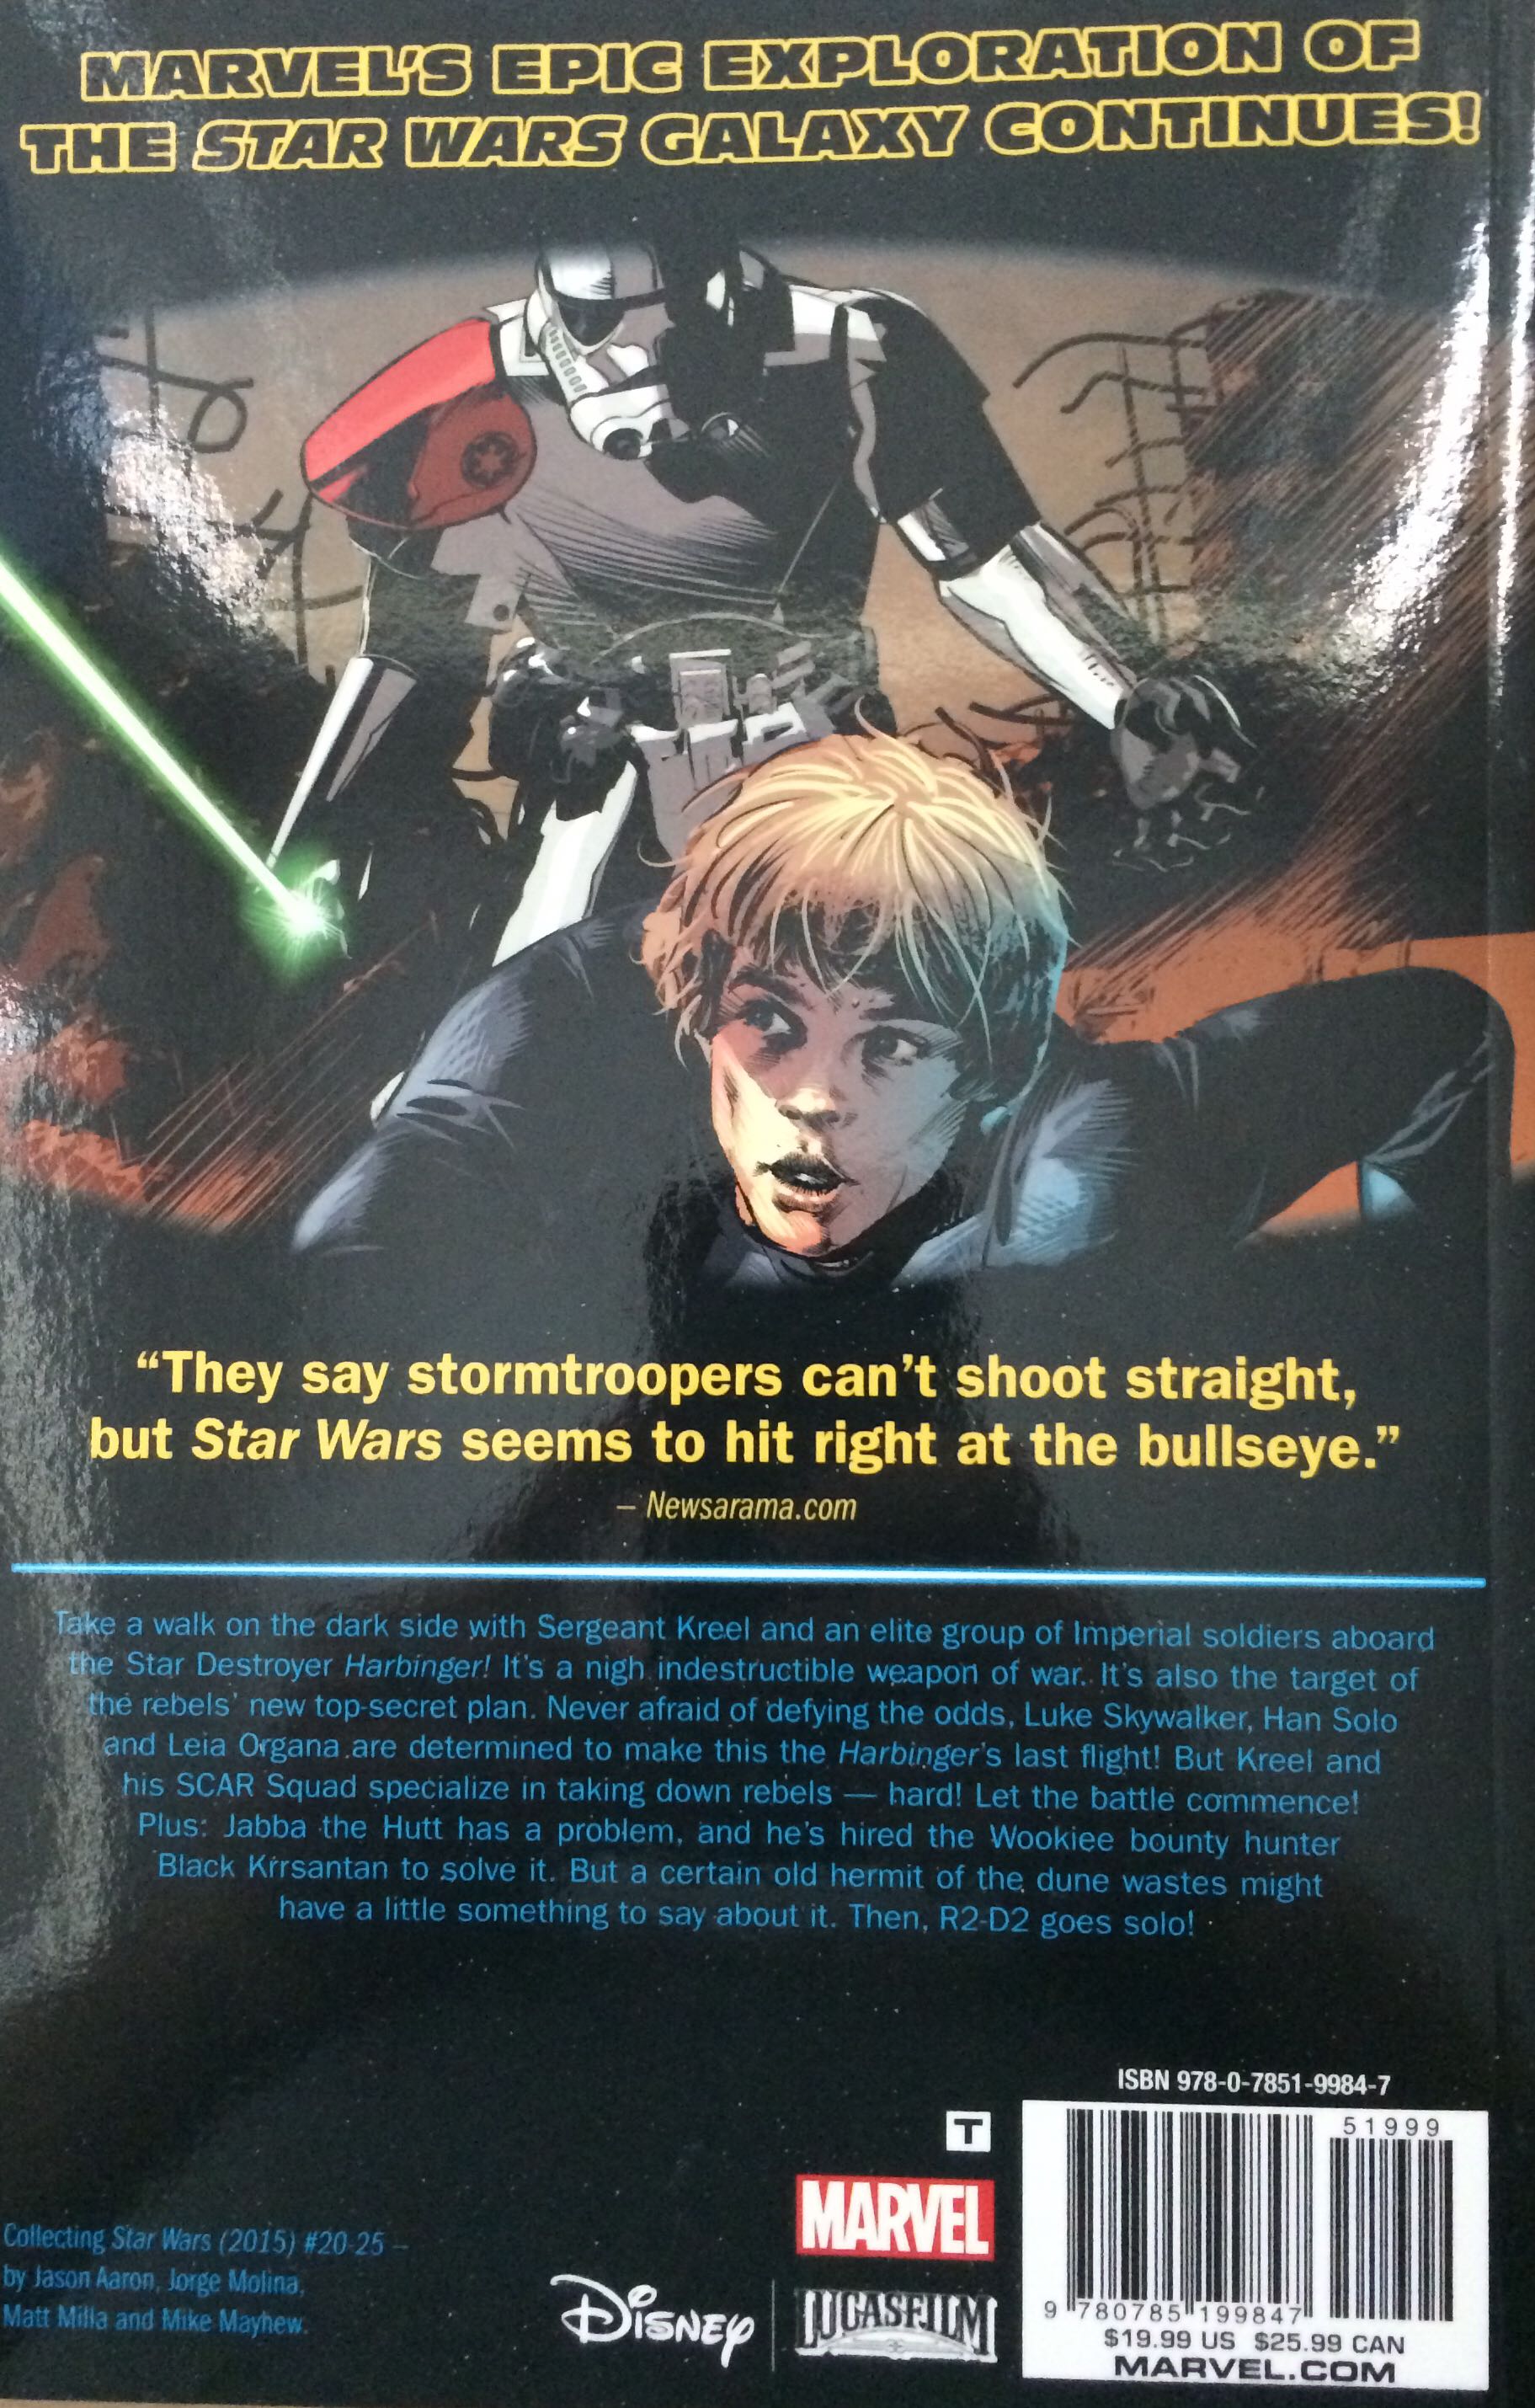 Marvel Star Wars: Vol 4: Last Flight Of The Harbinger - Chris Eliopoulos (Marvel - Trade Paperback) book collectible [Barcode 9780785199847] - Main Image 2